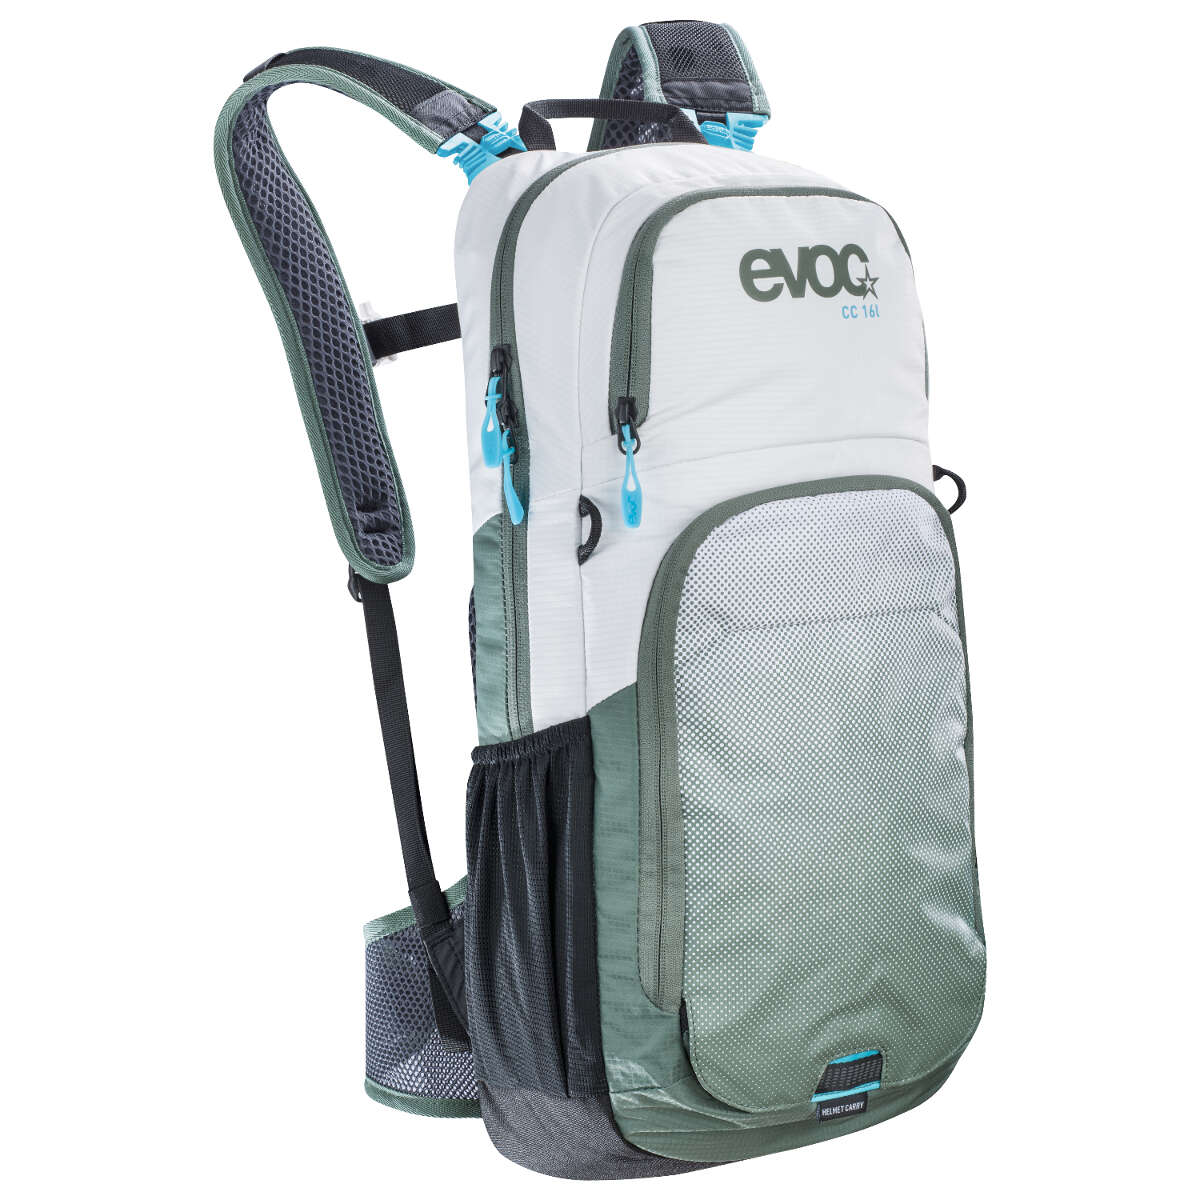 Evoc Backpack with Hydration System Compartment Cross Country White/Olive, 16 Liter